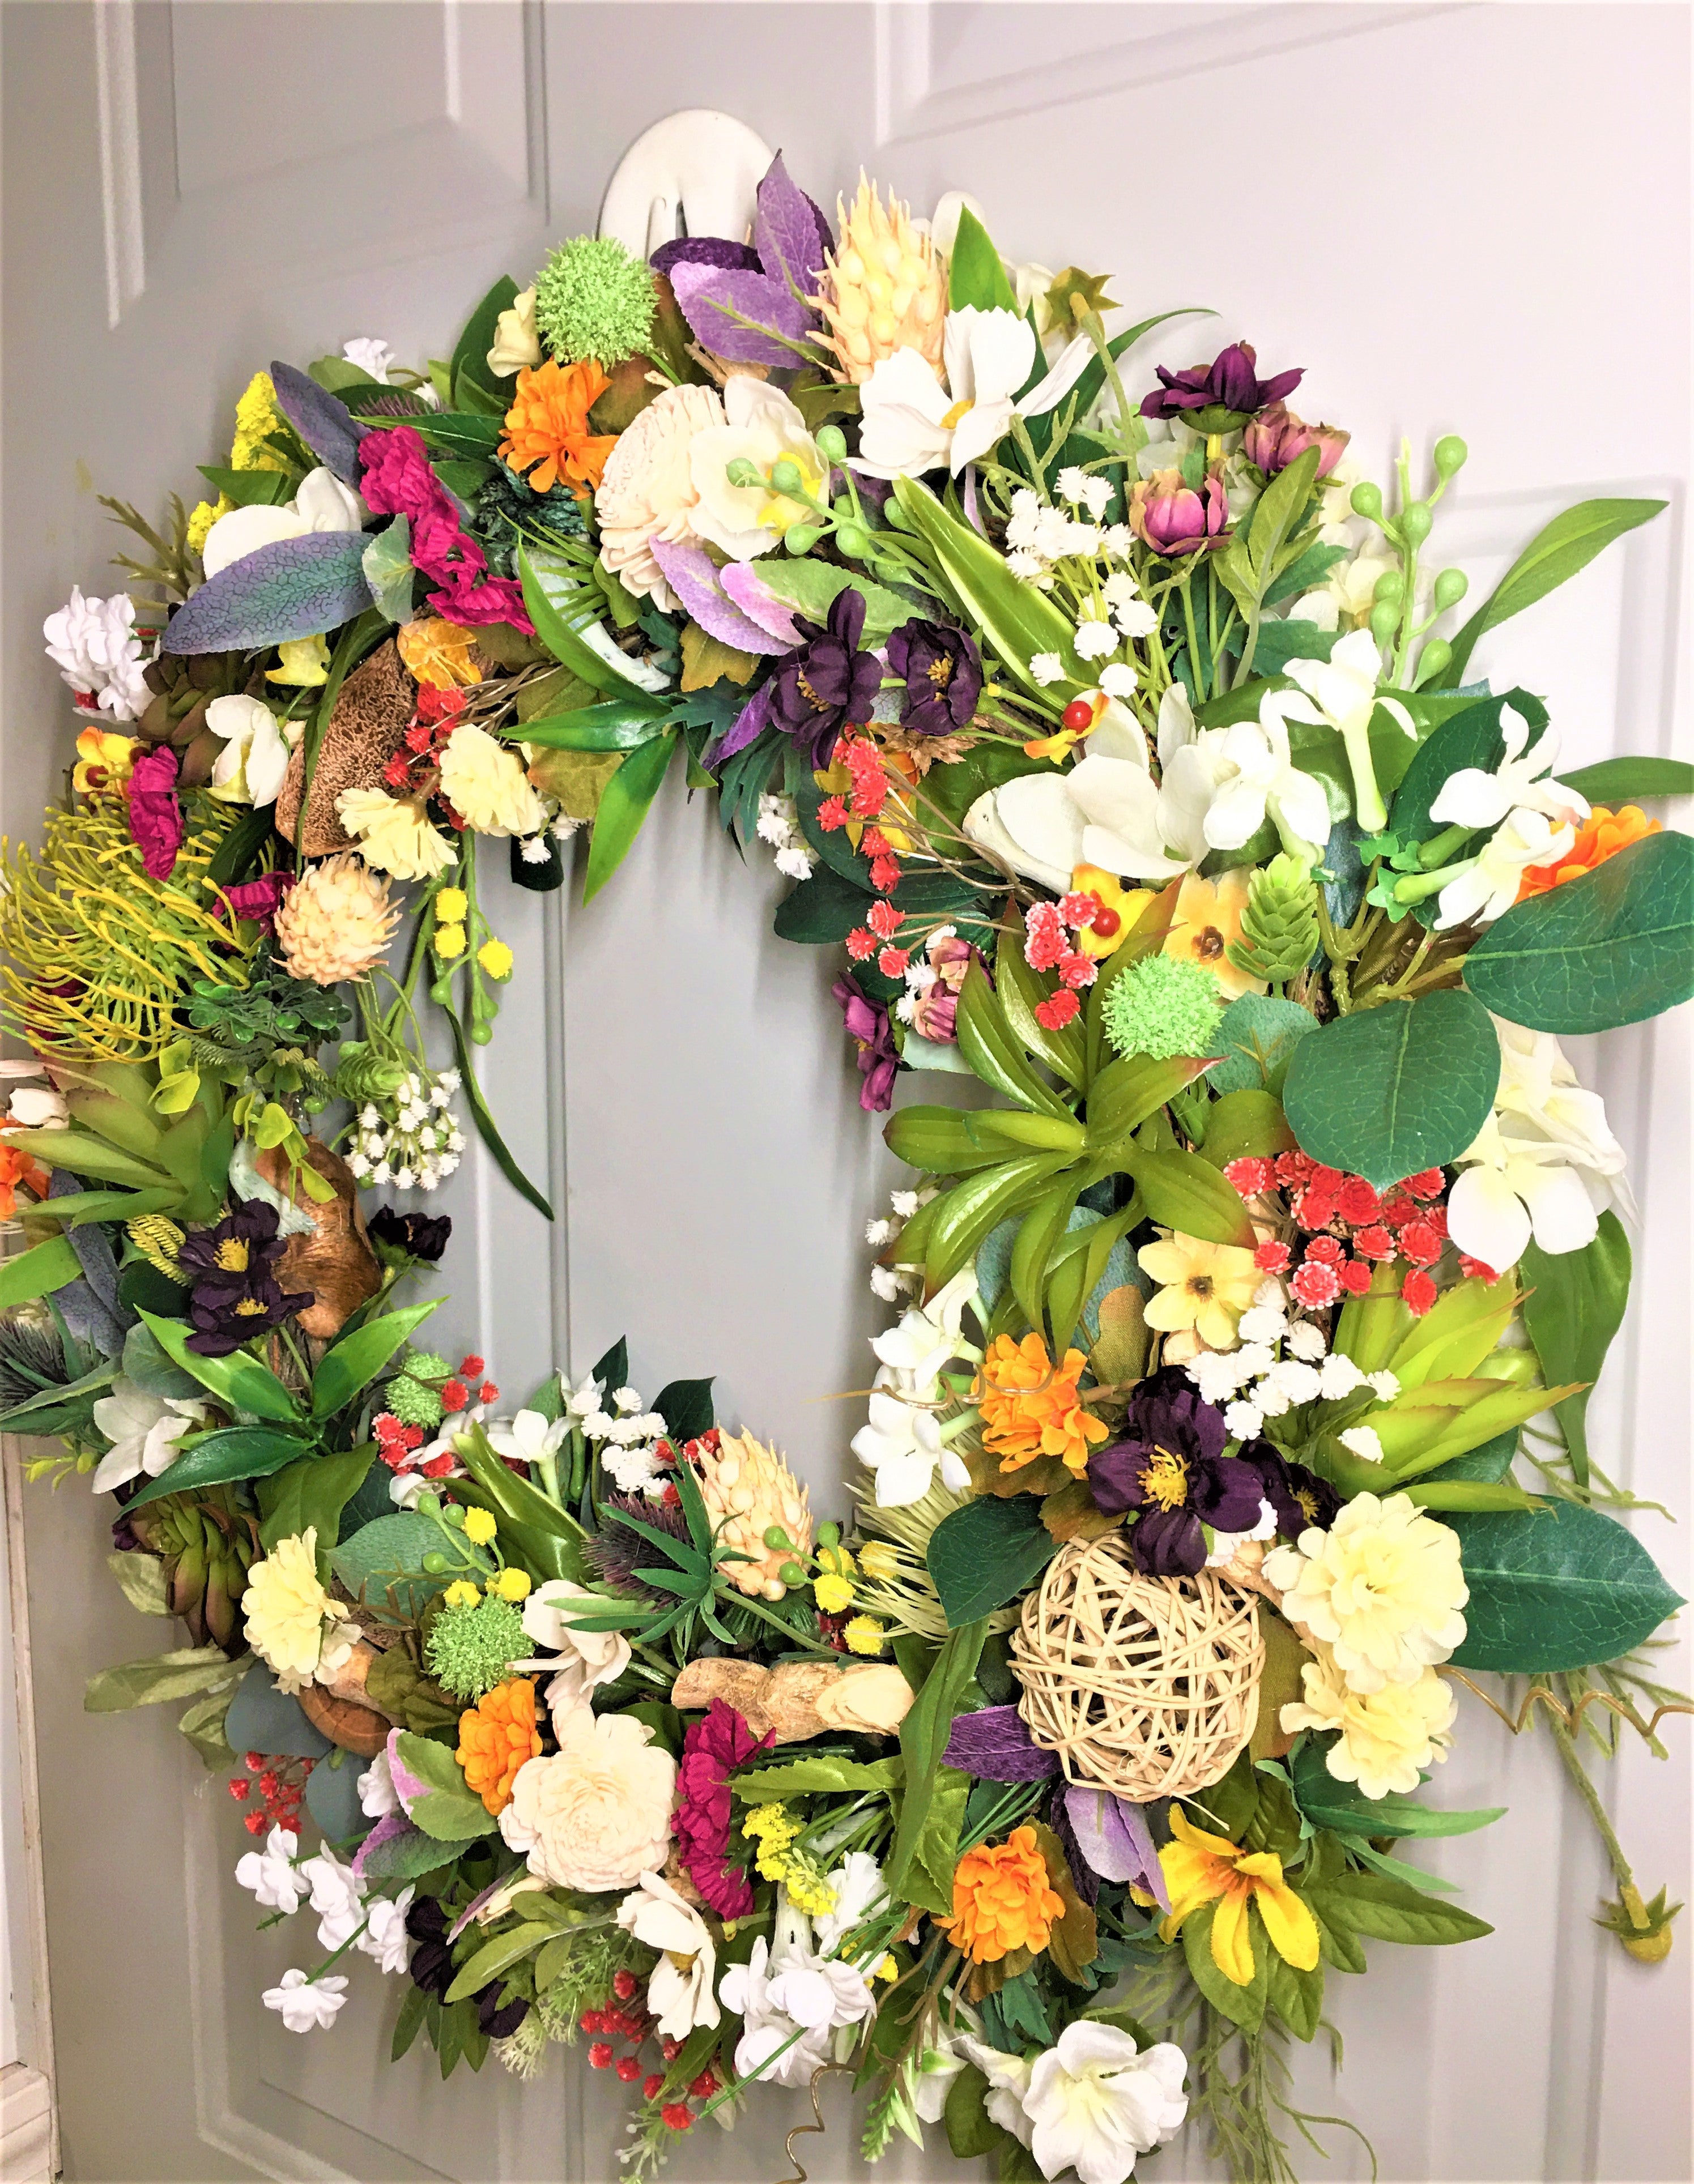 The Nature's Bounty Wreath 22"